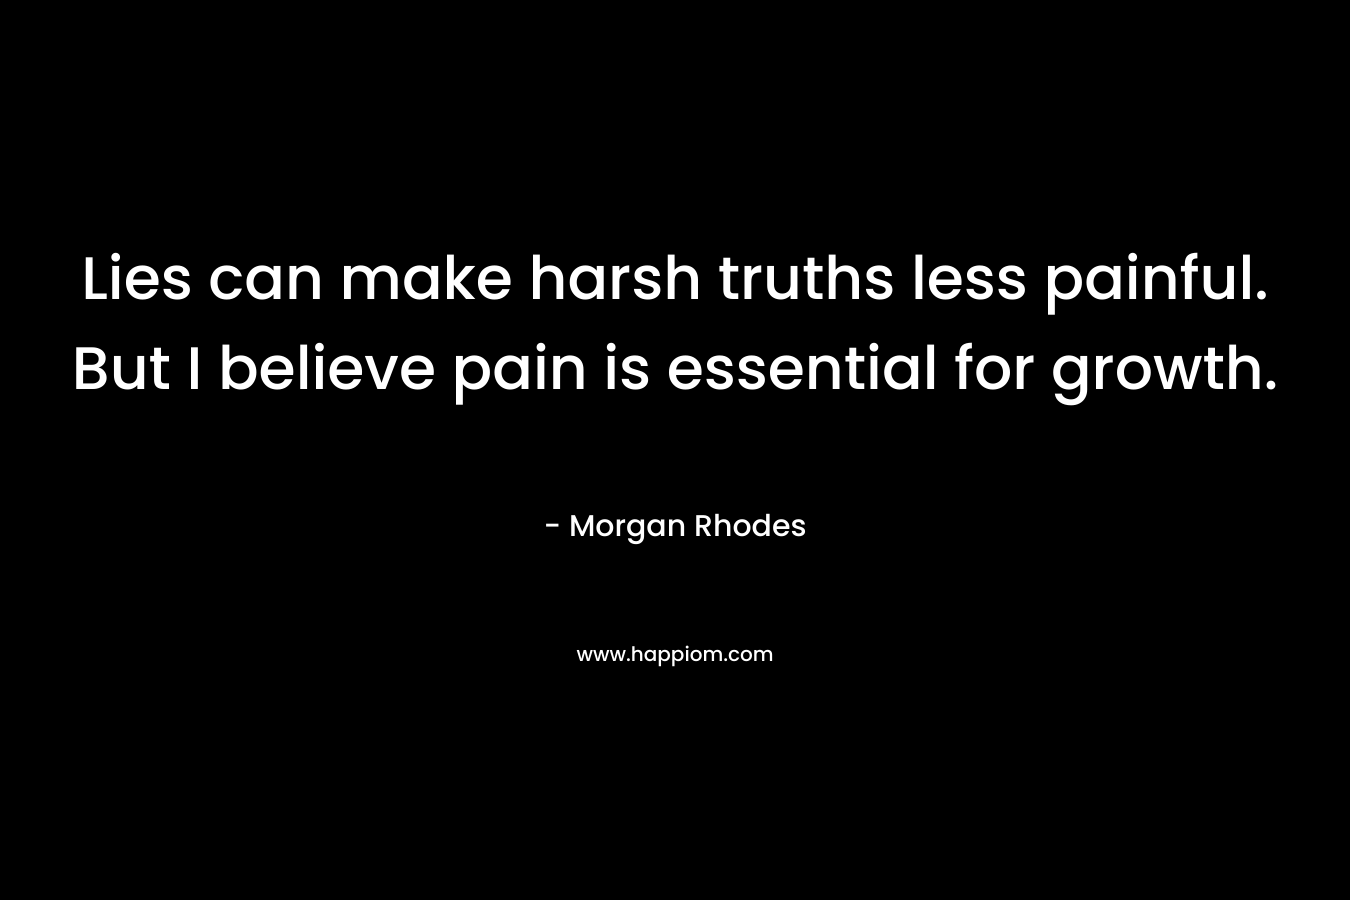 Lies can make harsh truths less painful. But I believe pain is essential for growth. – Morgan Rhodes